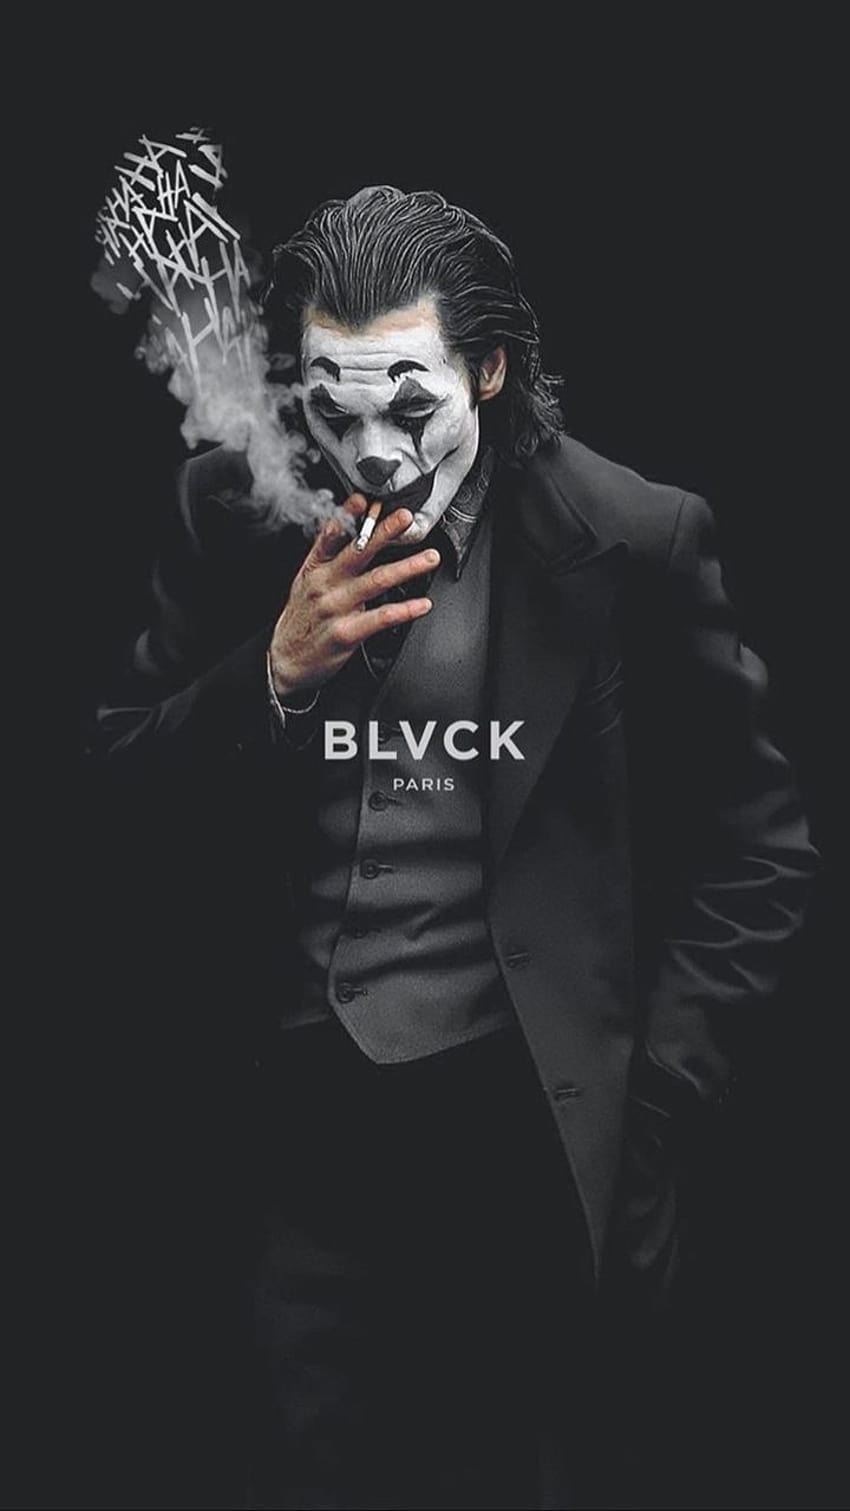 about text in by, blvck paris HD phone wallpaper